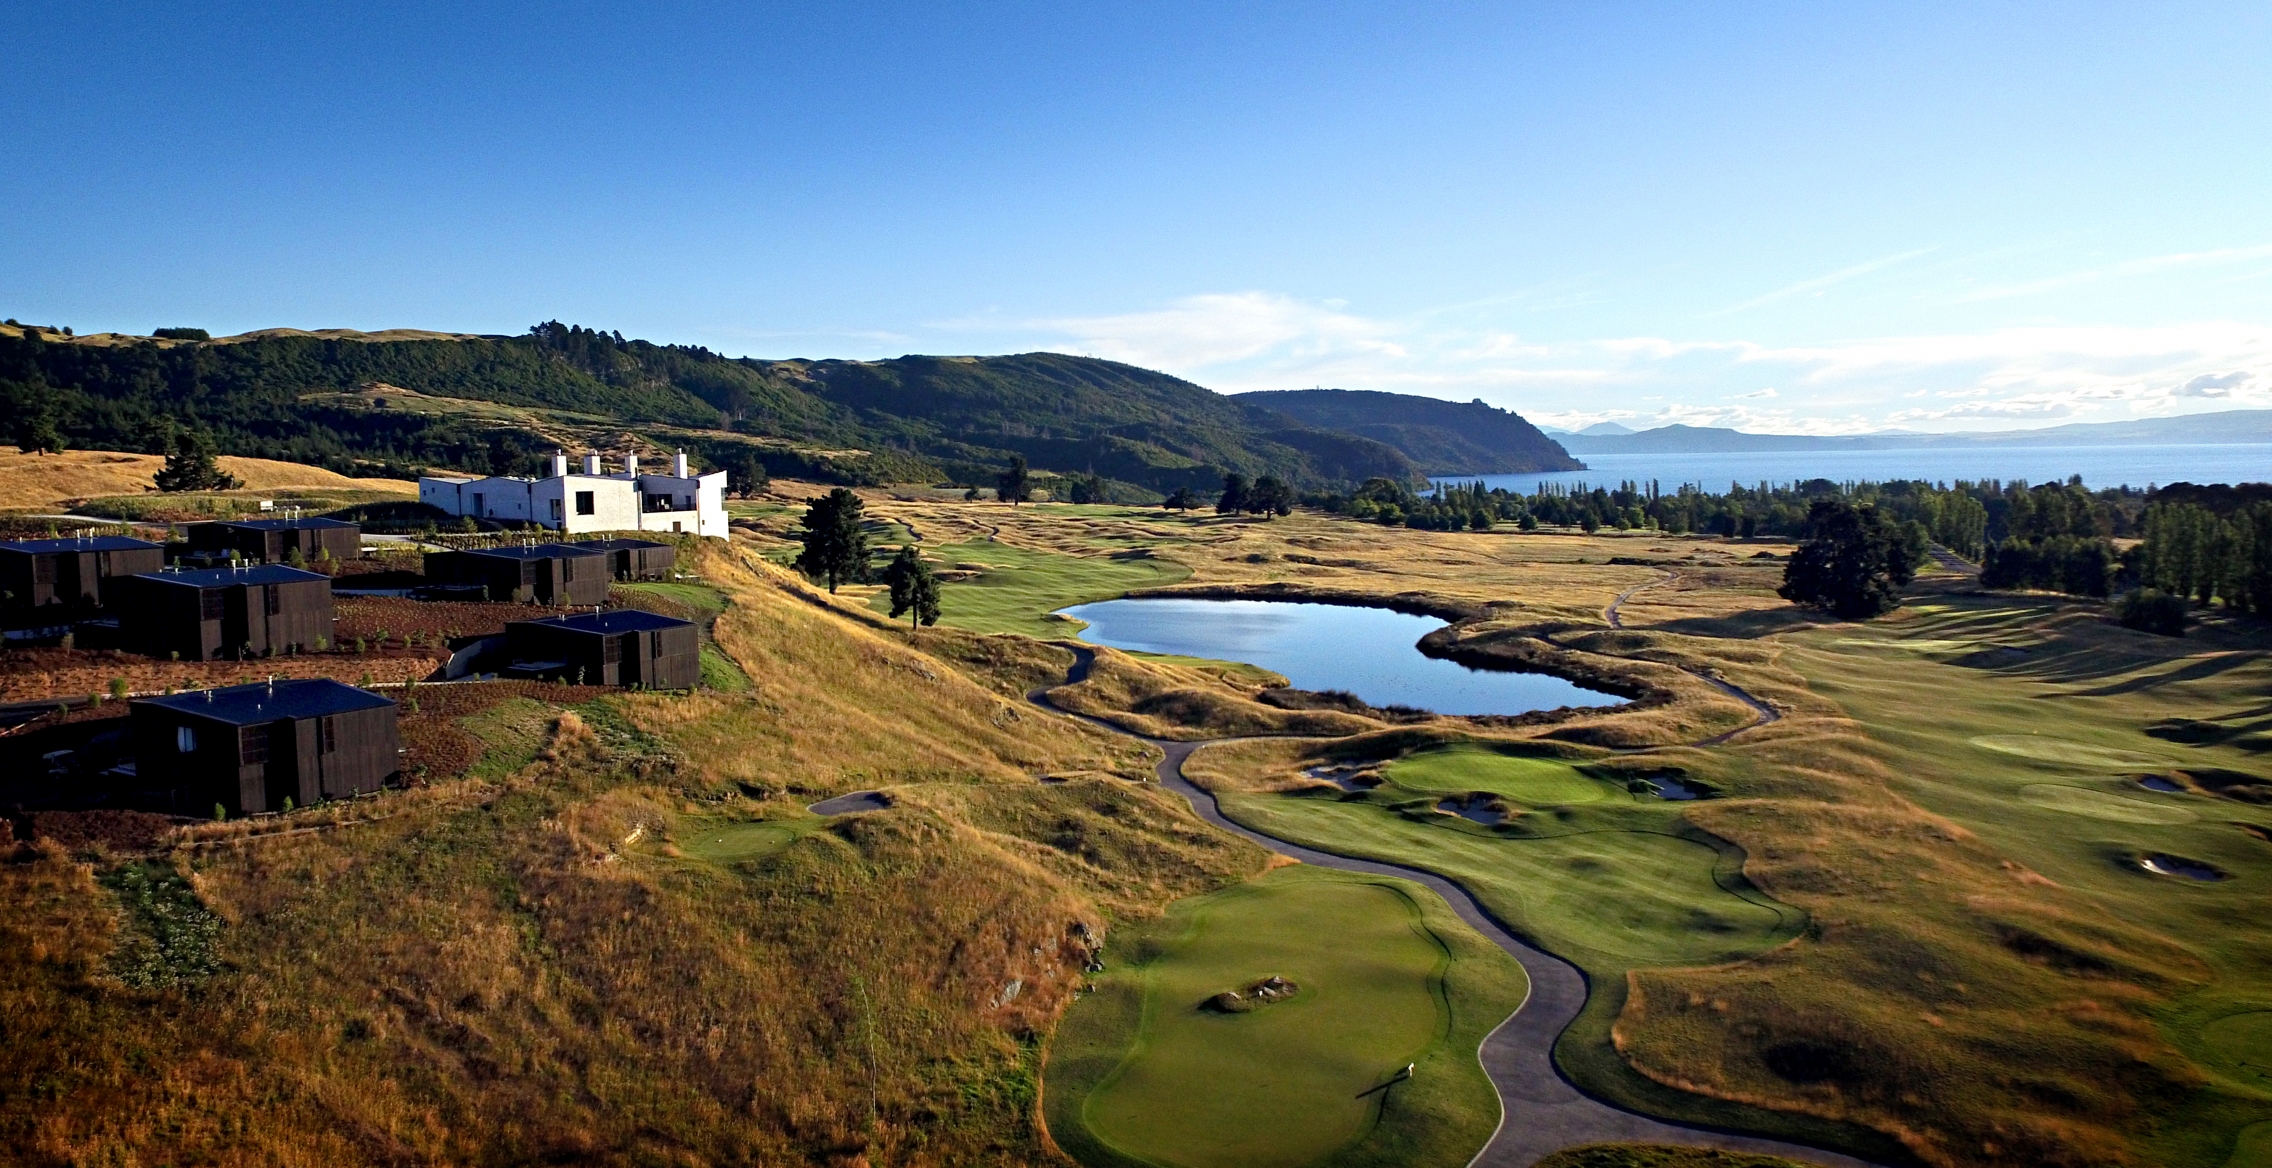 View over villas and golf course at Kinloch